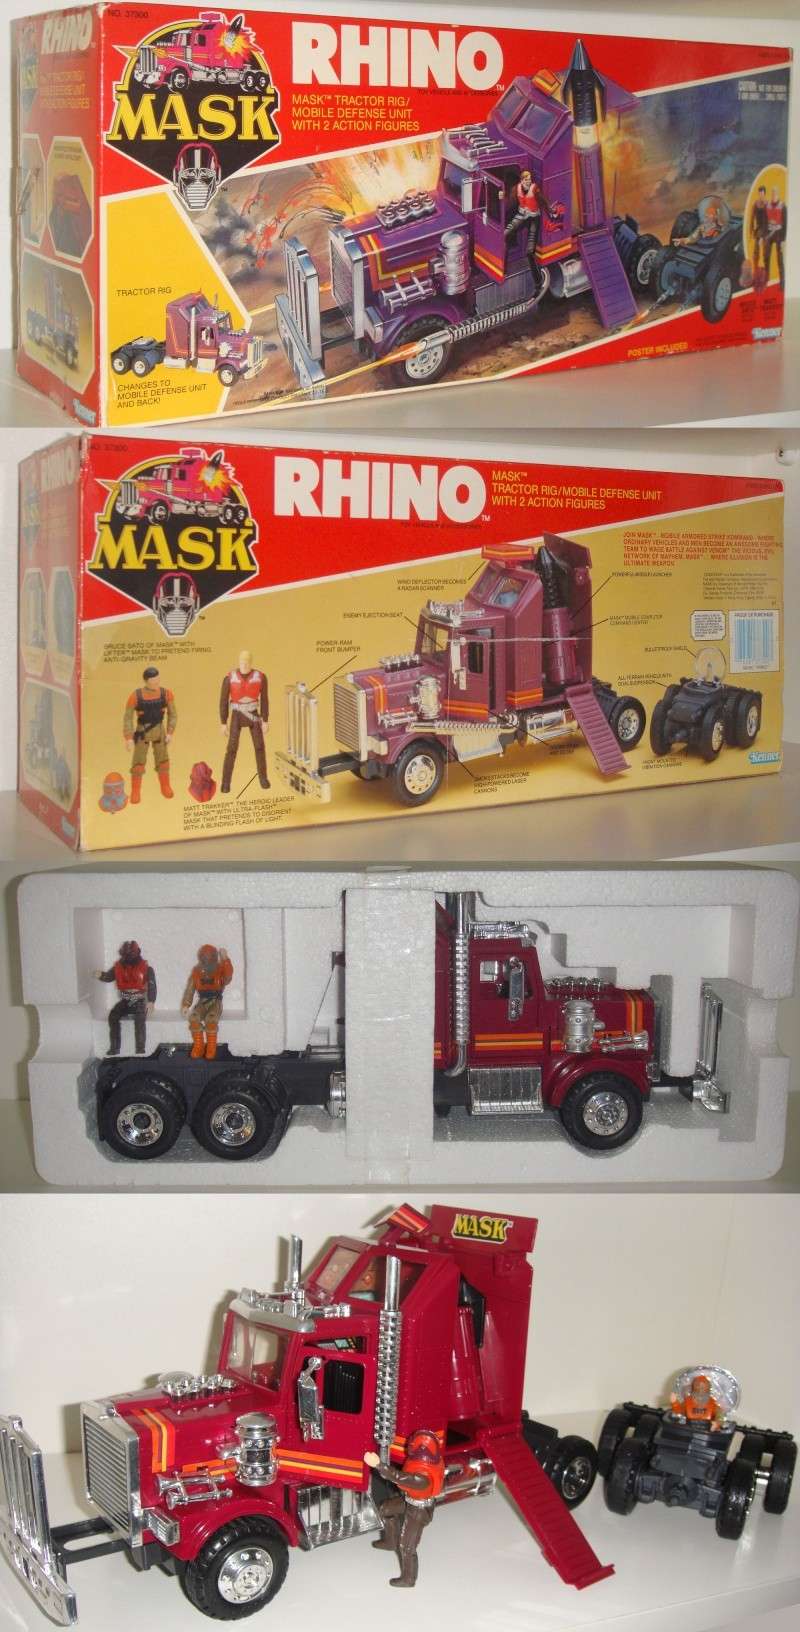 [Collection Membre] Ma collect M.A.S.K. :) (Groupir page 1). - Page 2 Rhino_11